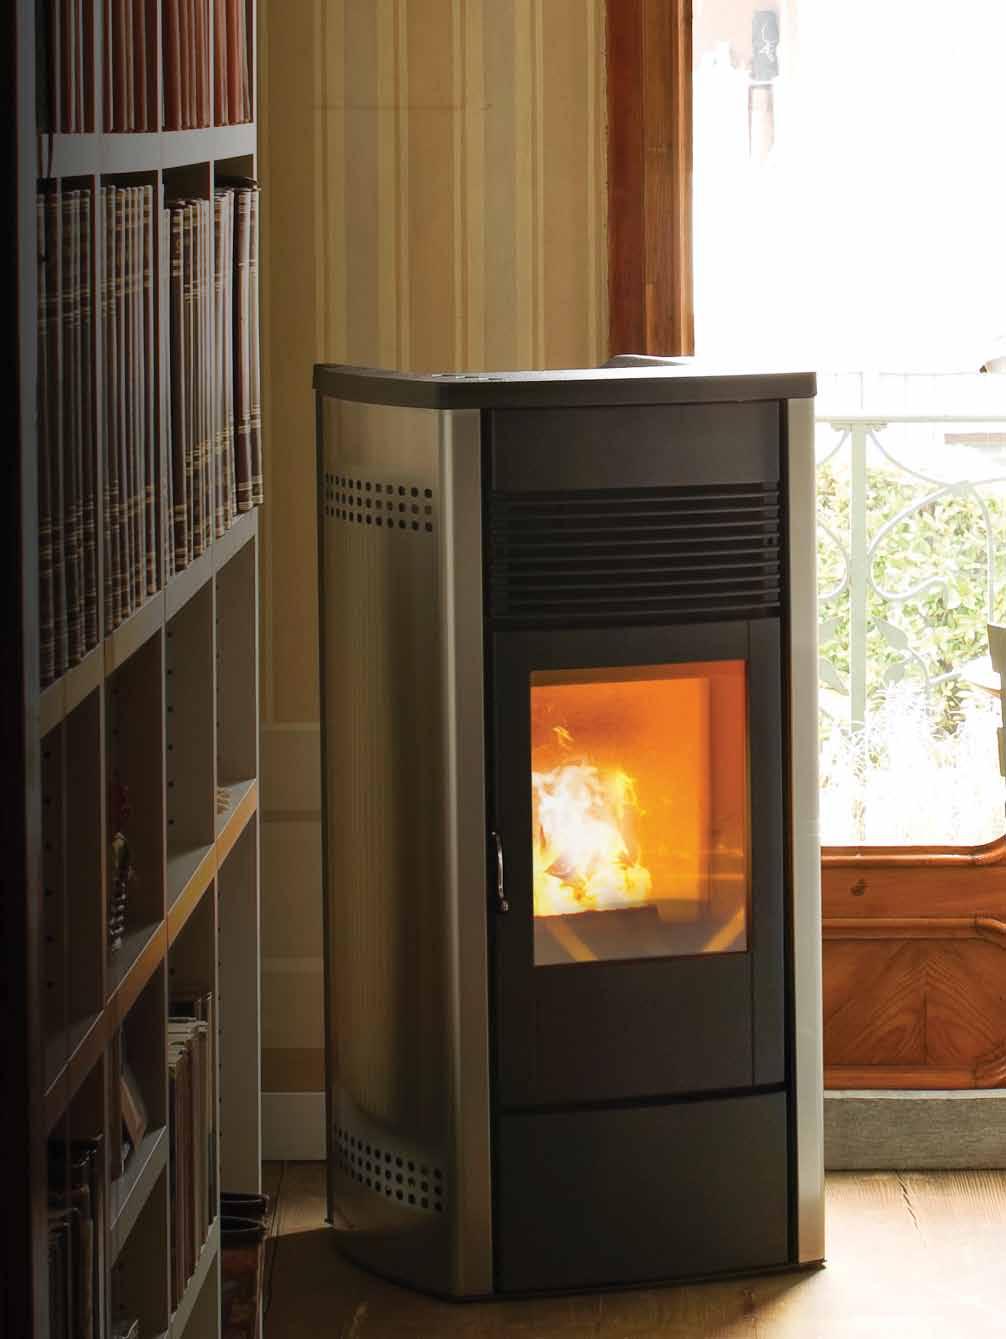 EGO RANGE With its advanced controlled timer system, cast iron and steel construction and high efficiency levels, this modern Italian design suits any open plan